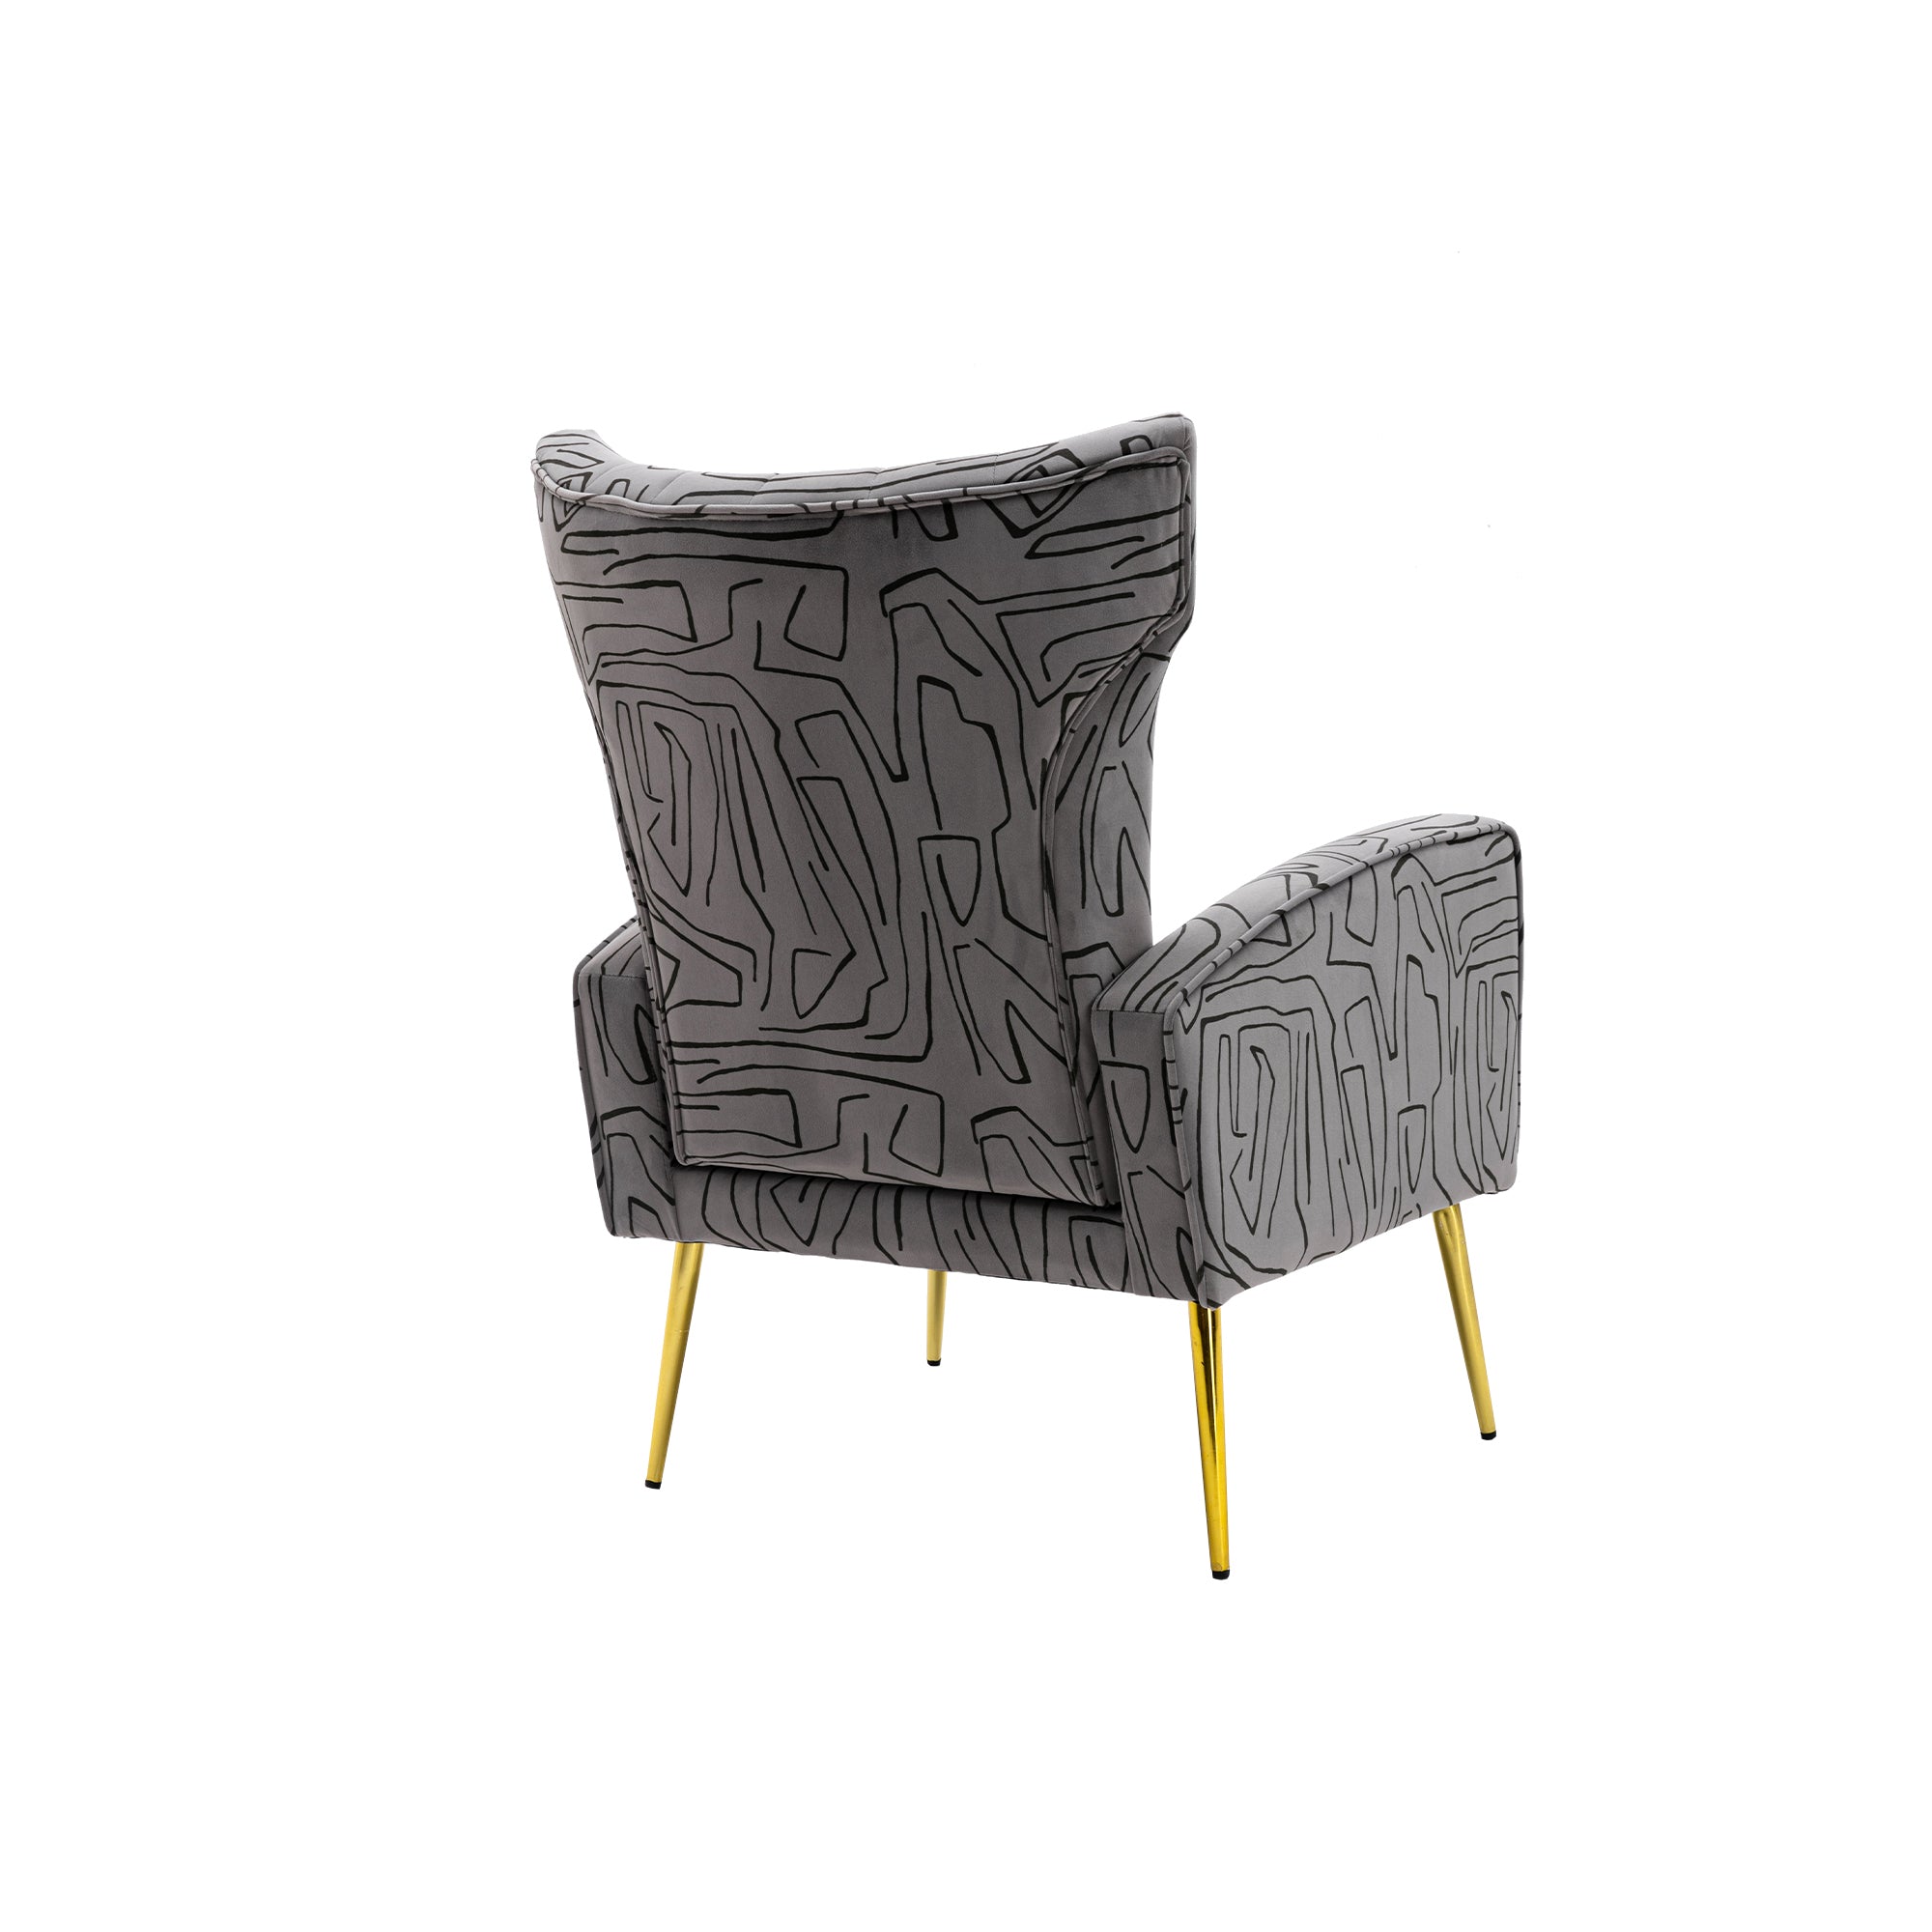 COOLMORE Accent Chair ,leisure single chair with Rose grey-metal